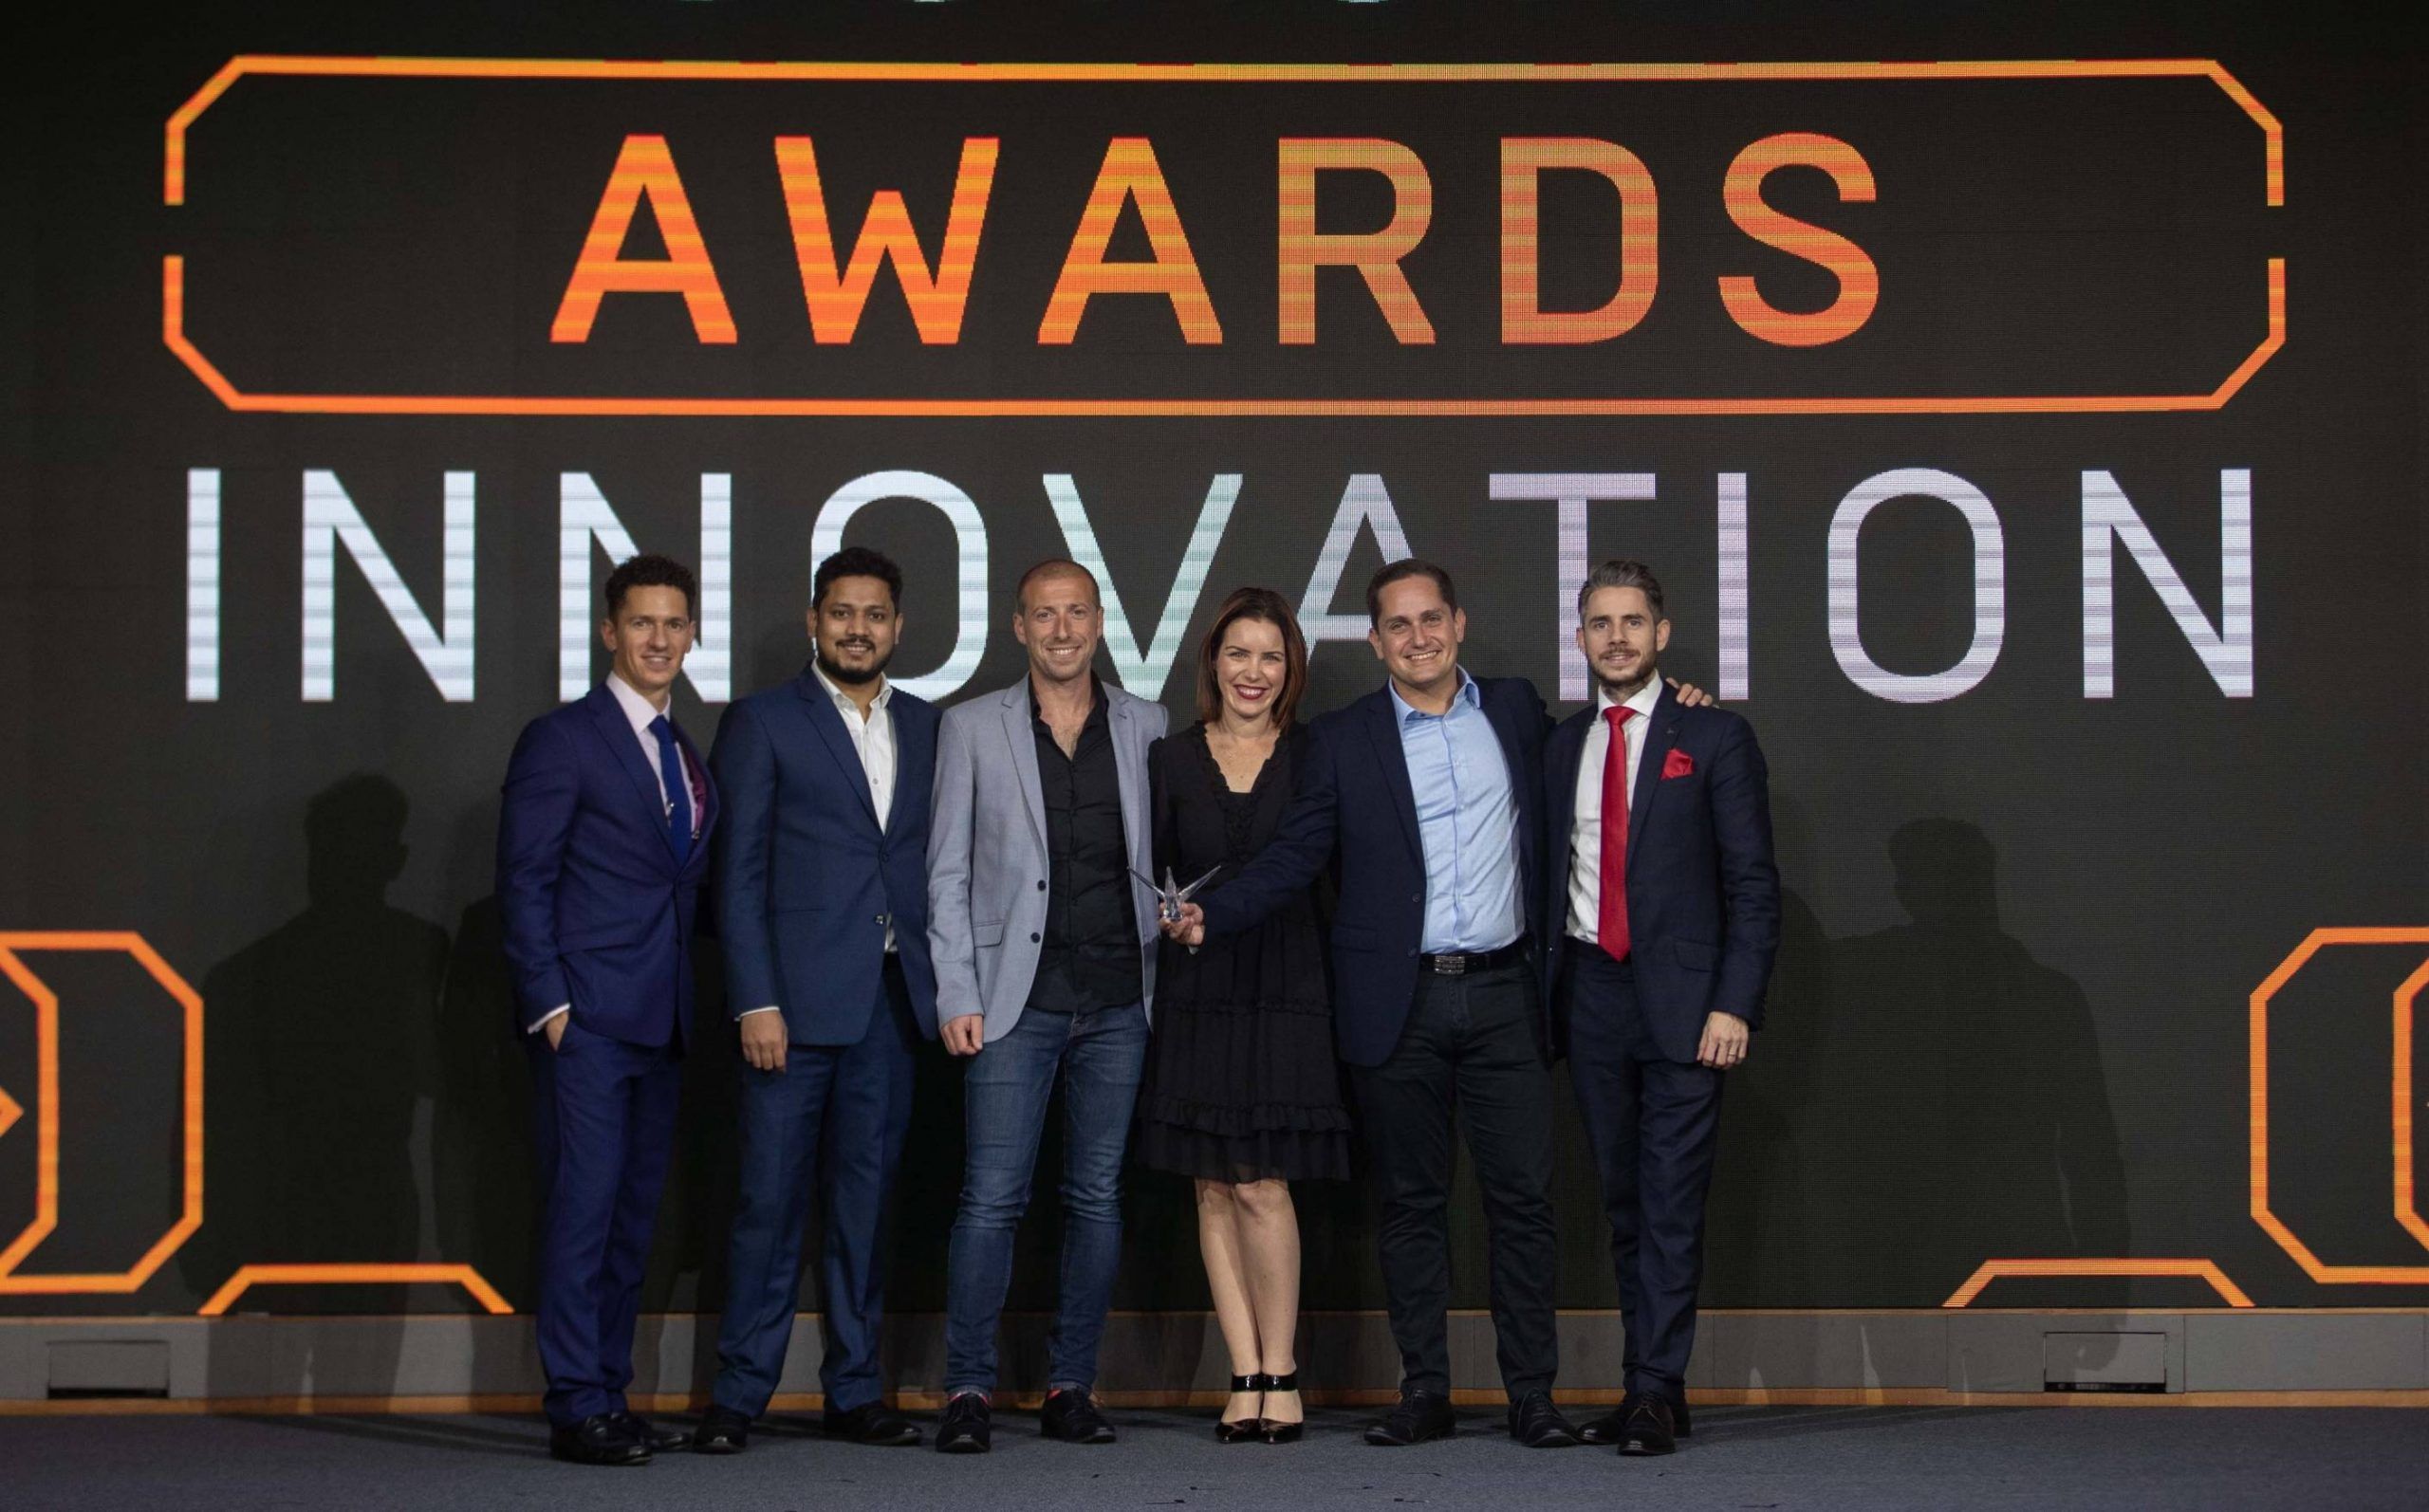 MoneyNetint Wins Ripple&#39;s Best Connector Award For Making The Most Connections On The Ripple Network #awards #c… | Ripple, Financial institutions, Network marketing